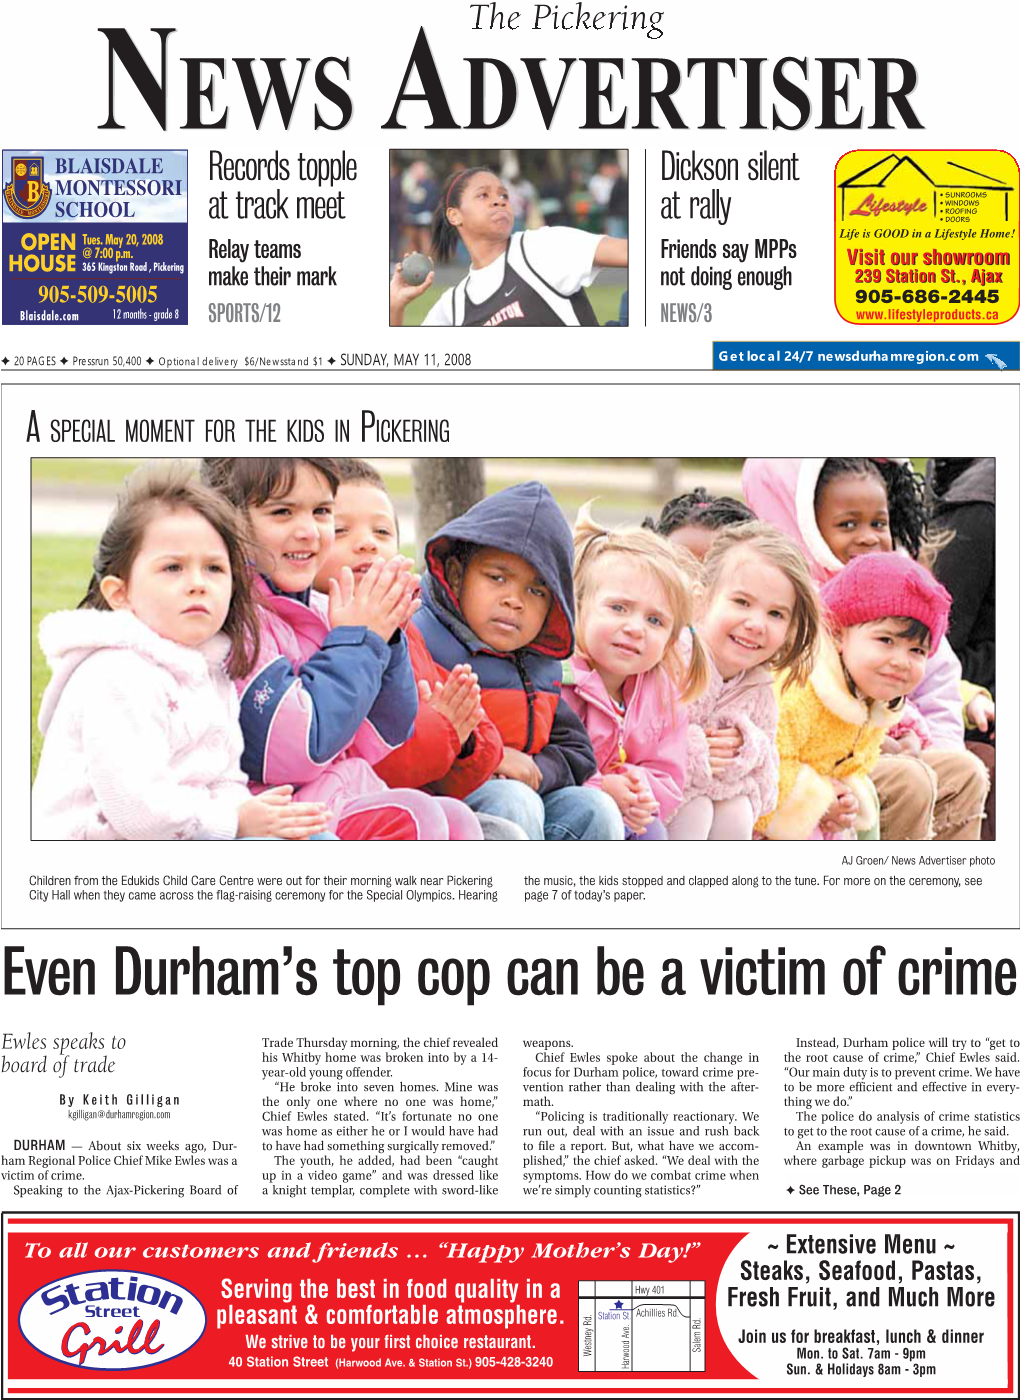 Even Durham's Top Cop Can Be a Victim of Crime